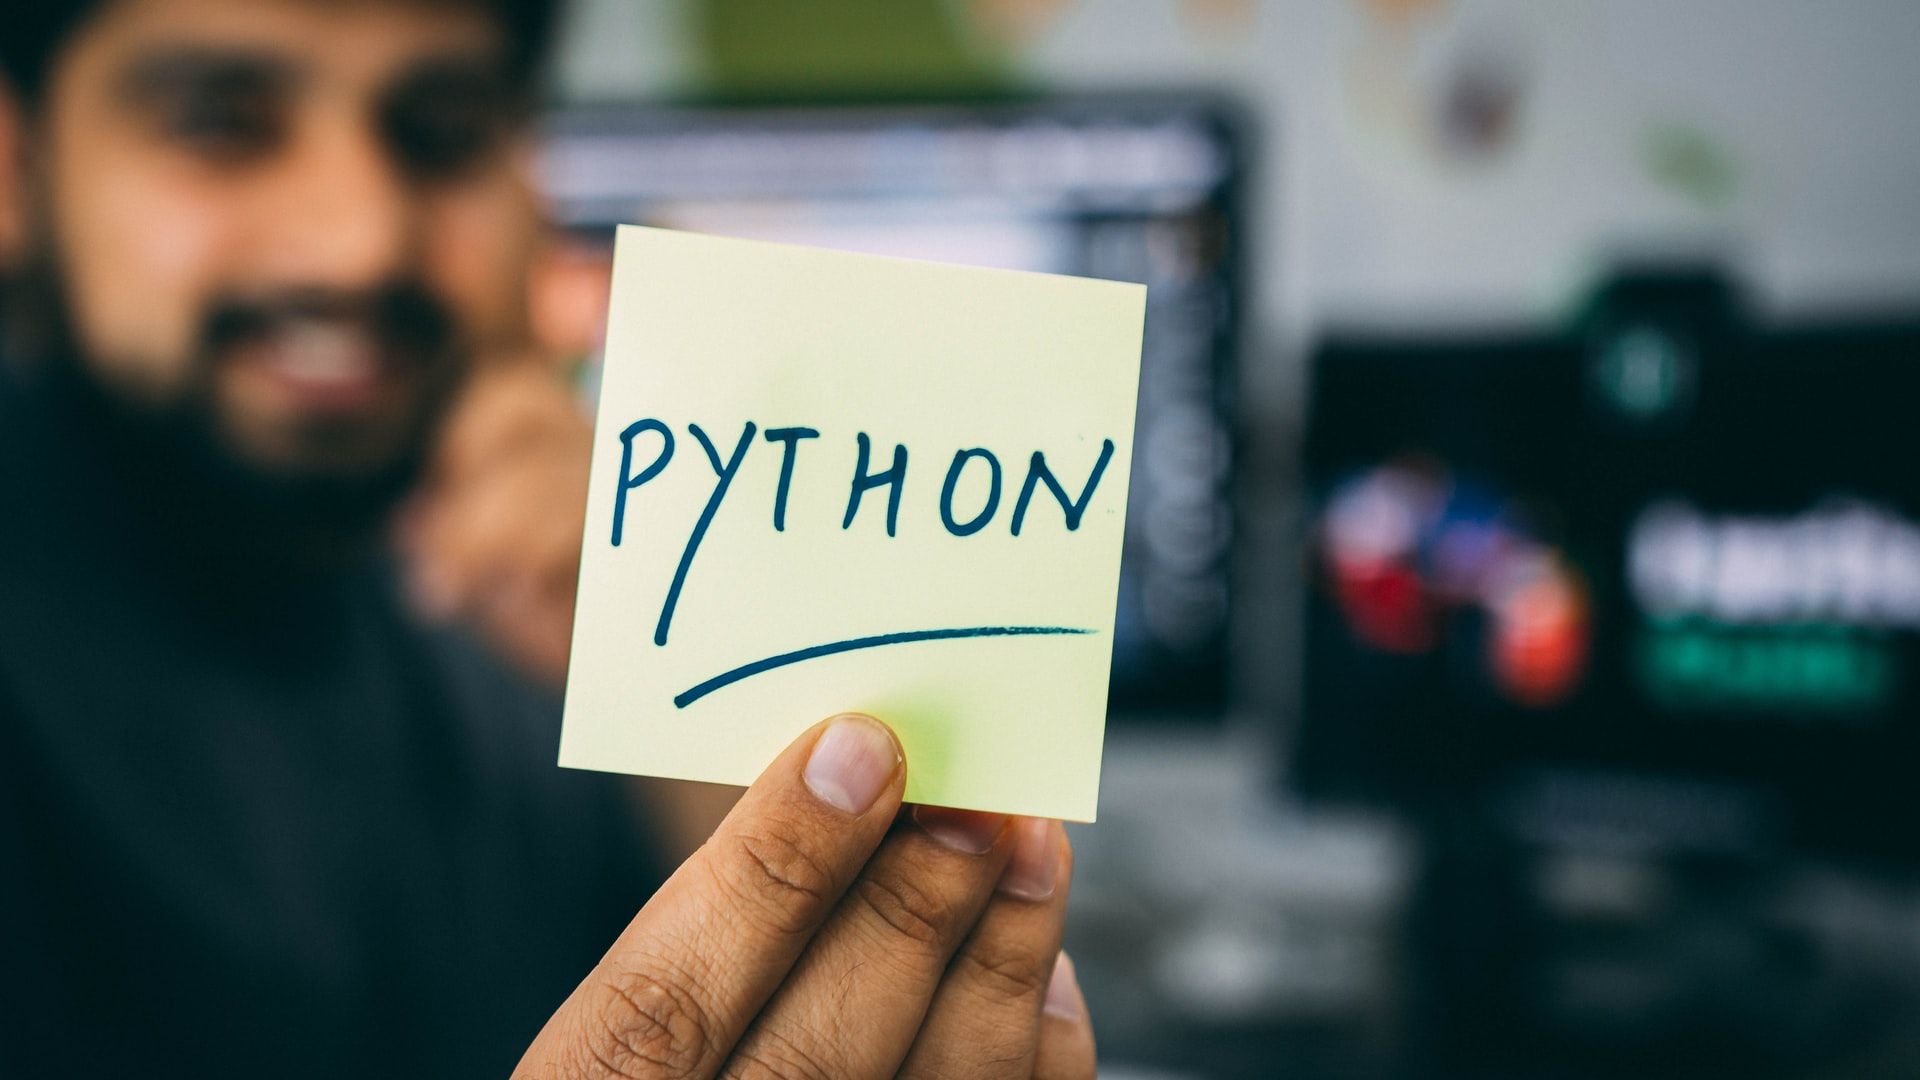 post-it with Python written on it